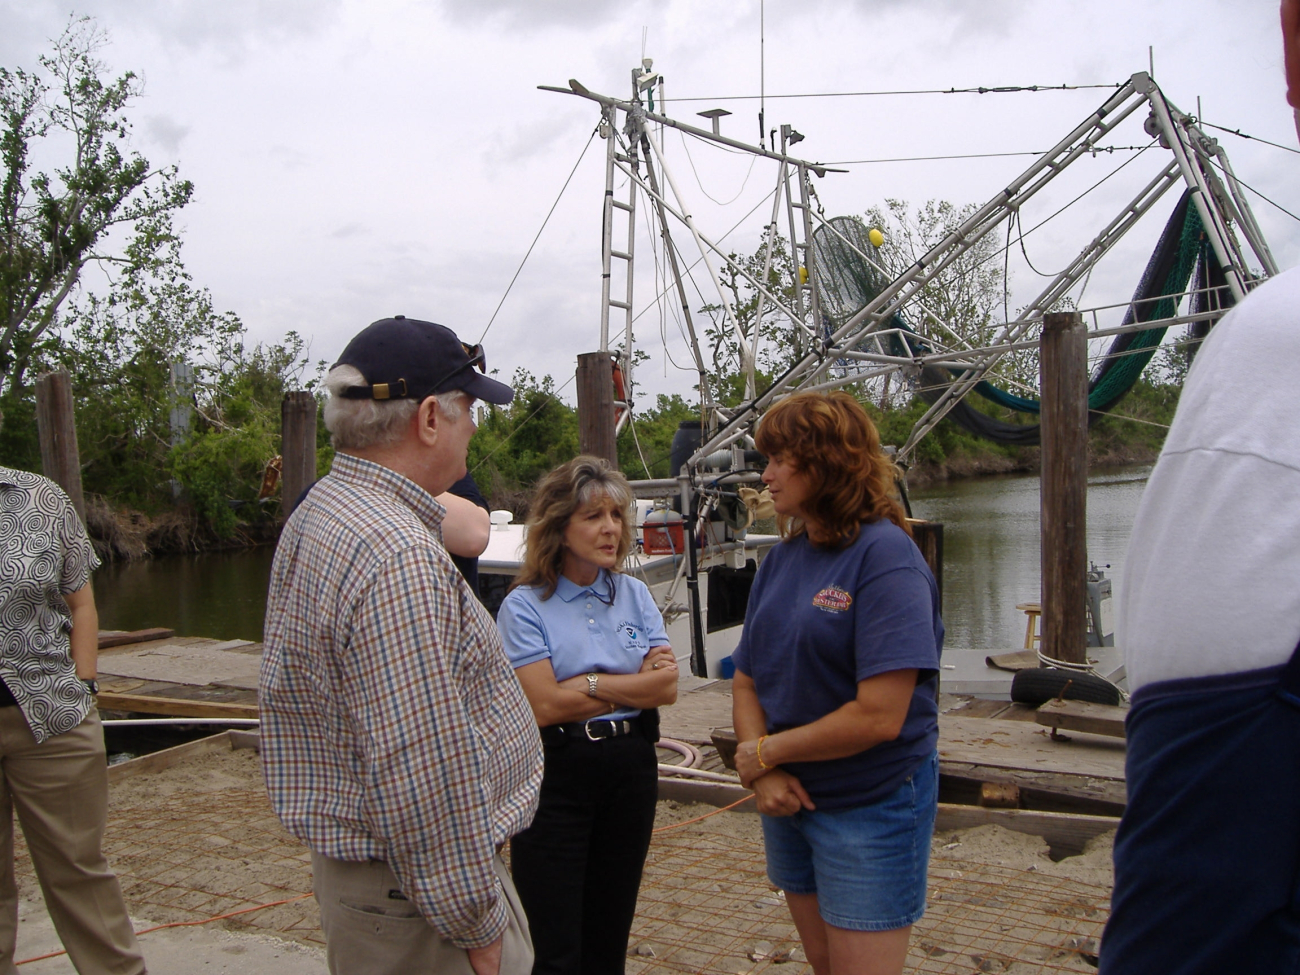 Discussing recovery plan after Hurricane Katrina